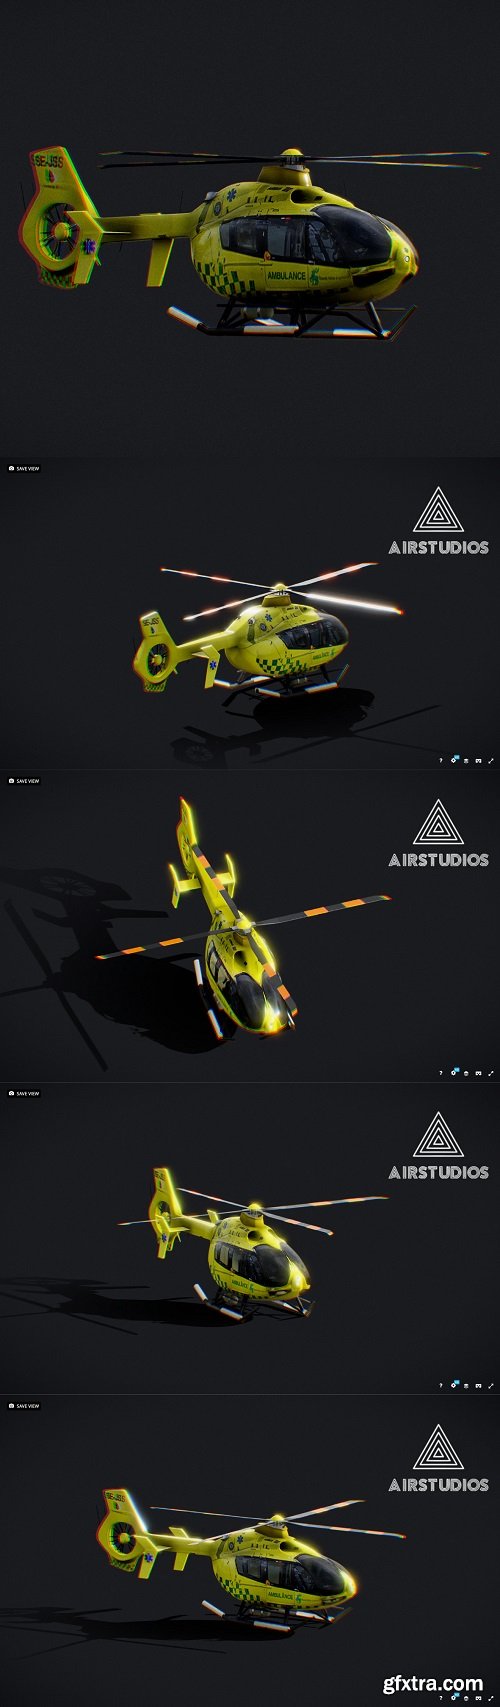 Ambulance Helicopter Airbus H135 3D Model